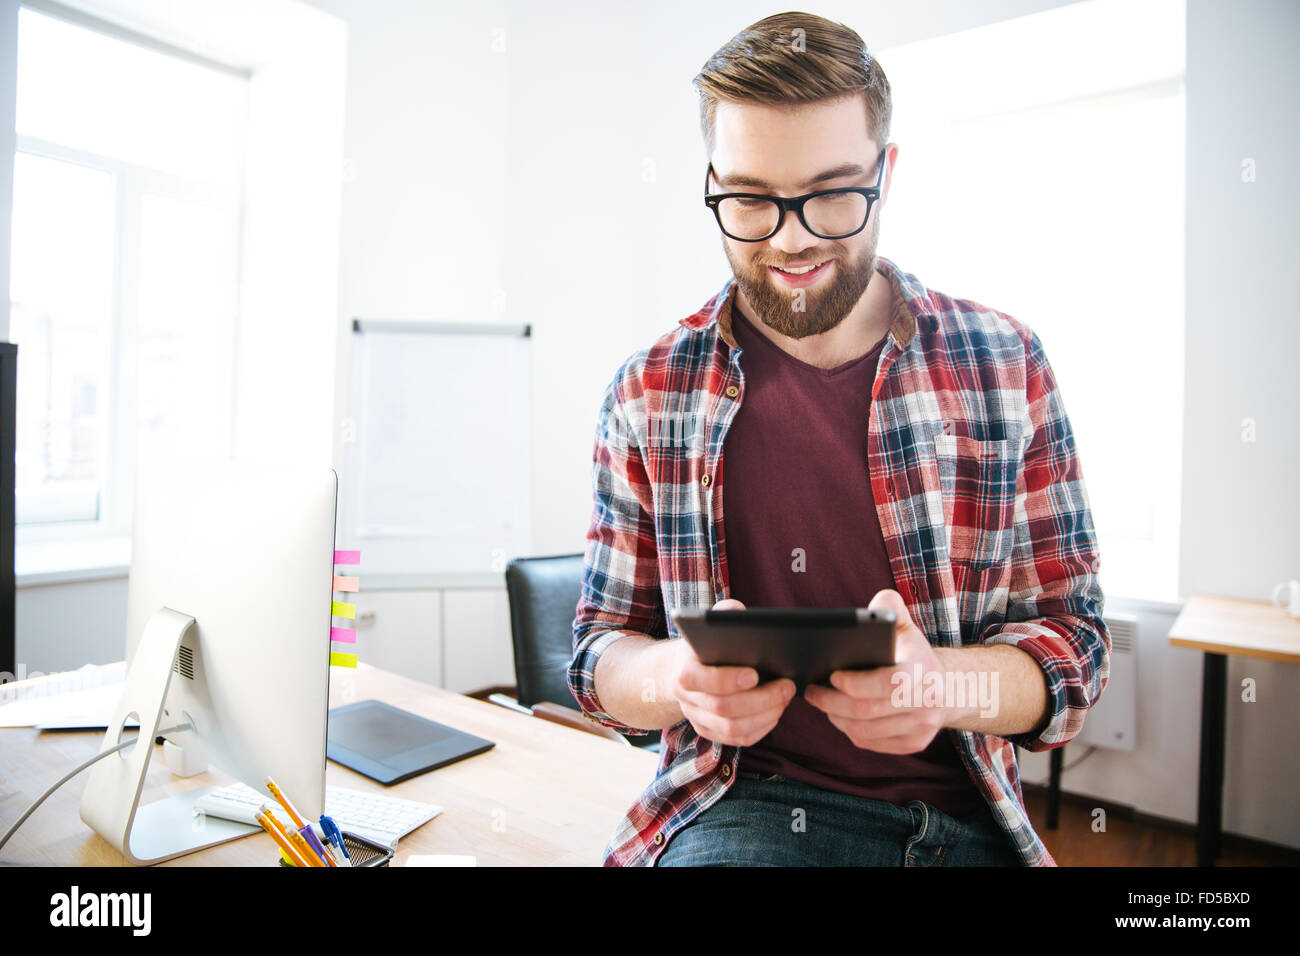 Happy handsome man with beard in plaid shirt and glasses sitting on the table in office and using tablet Stock Photo